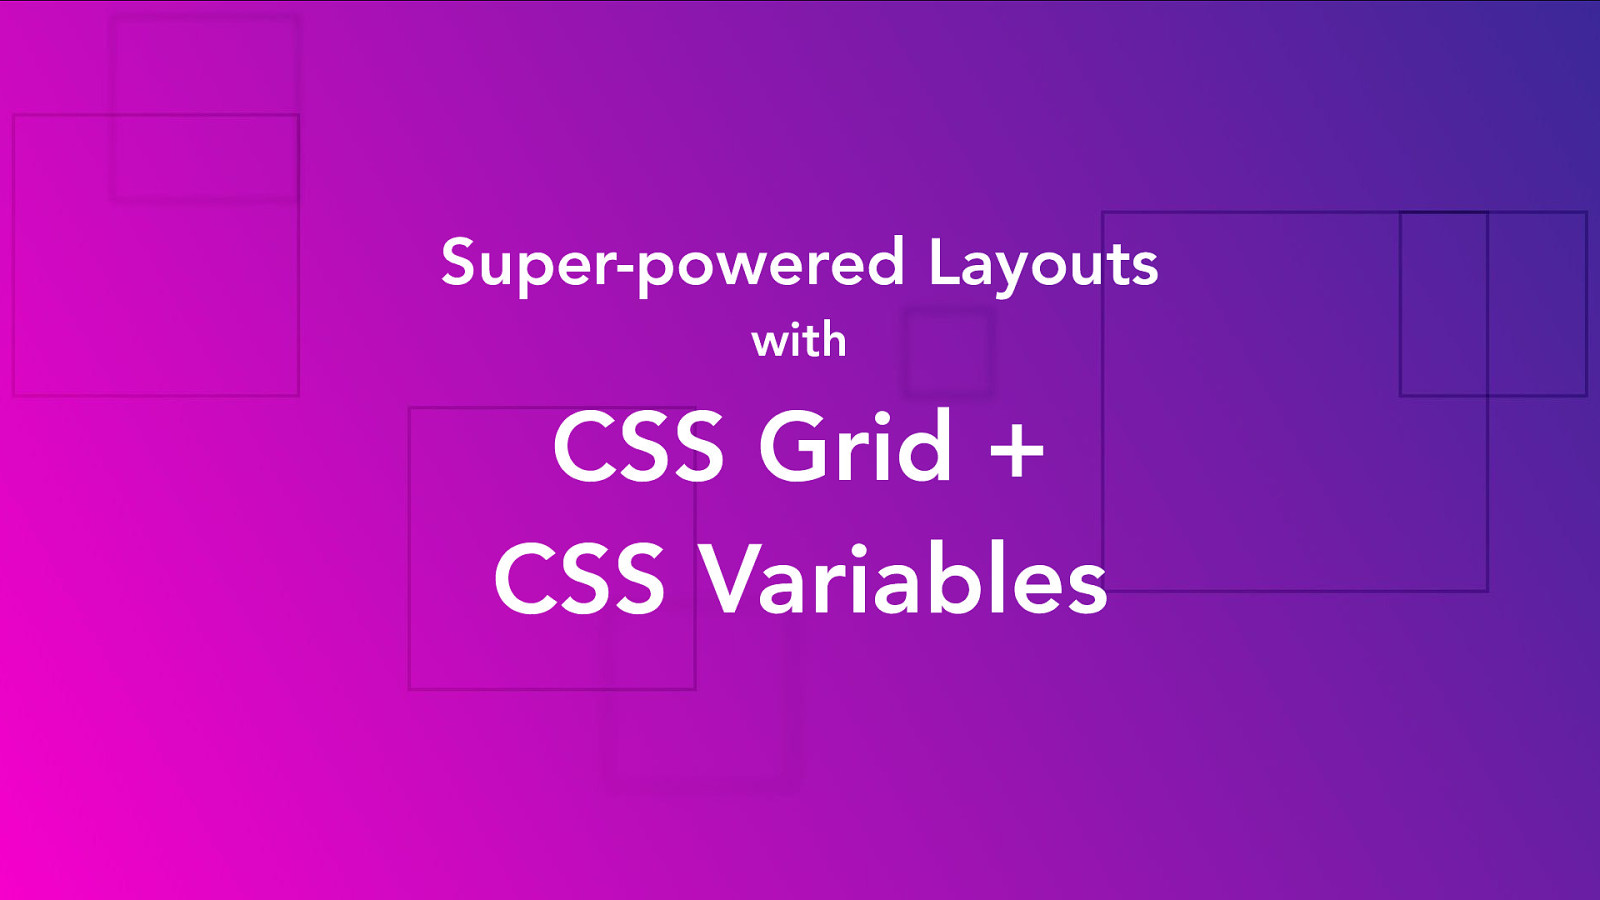 Super-powered Layouts with CSS Grid and CSS Variables